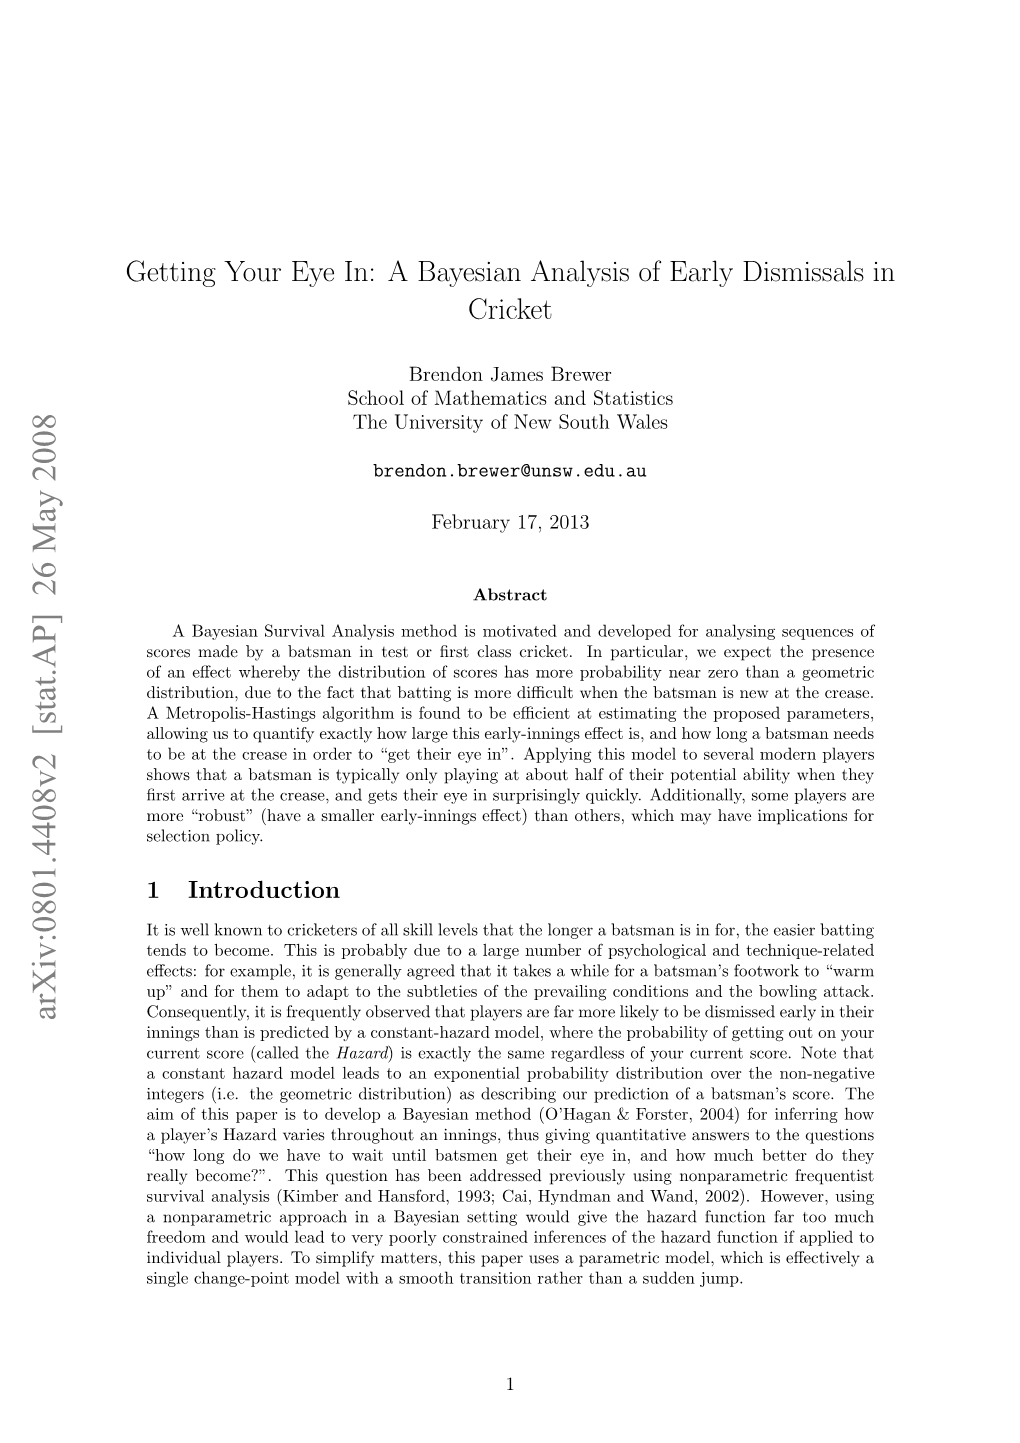 A Bayesian Analysis of Early Dismissals in Cricket